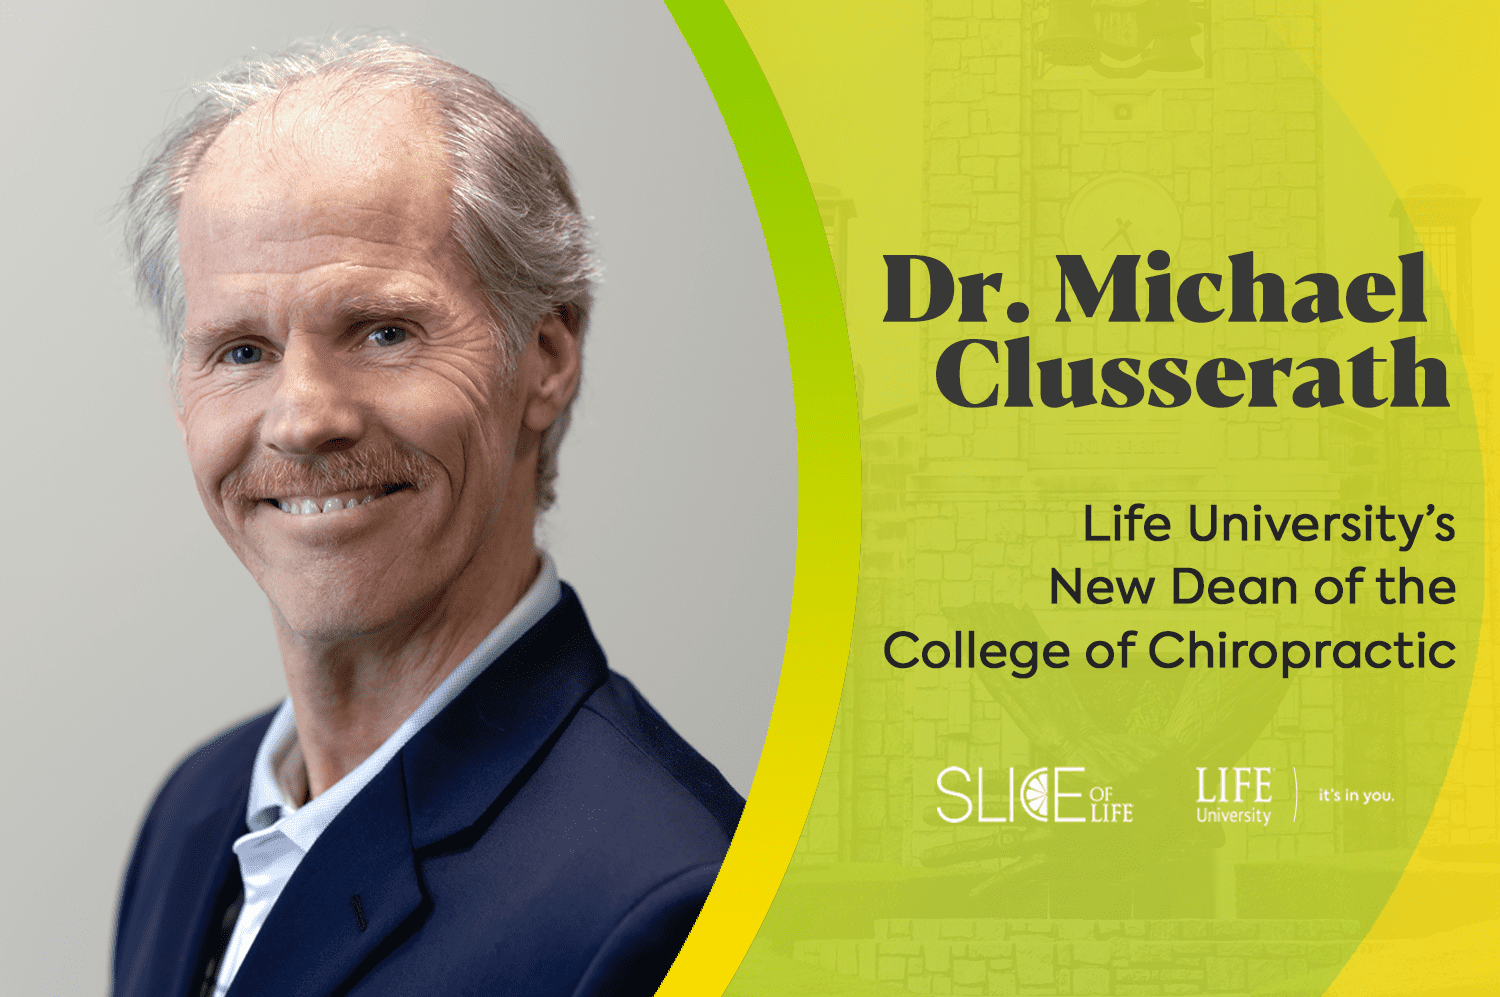 Meet Dr. Michael Clusserath, Life University’s New Dean of the College of Chiropractic